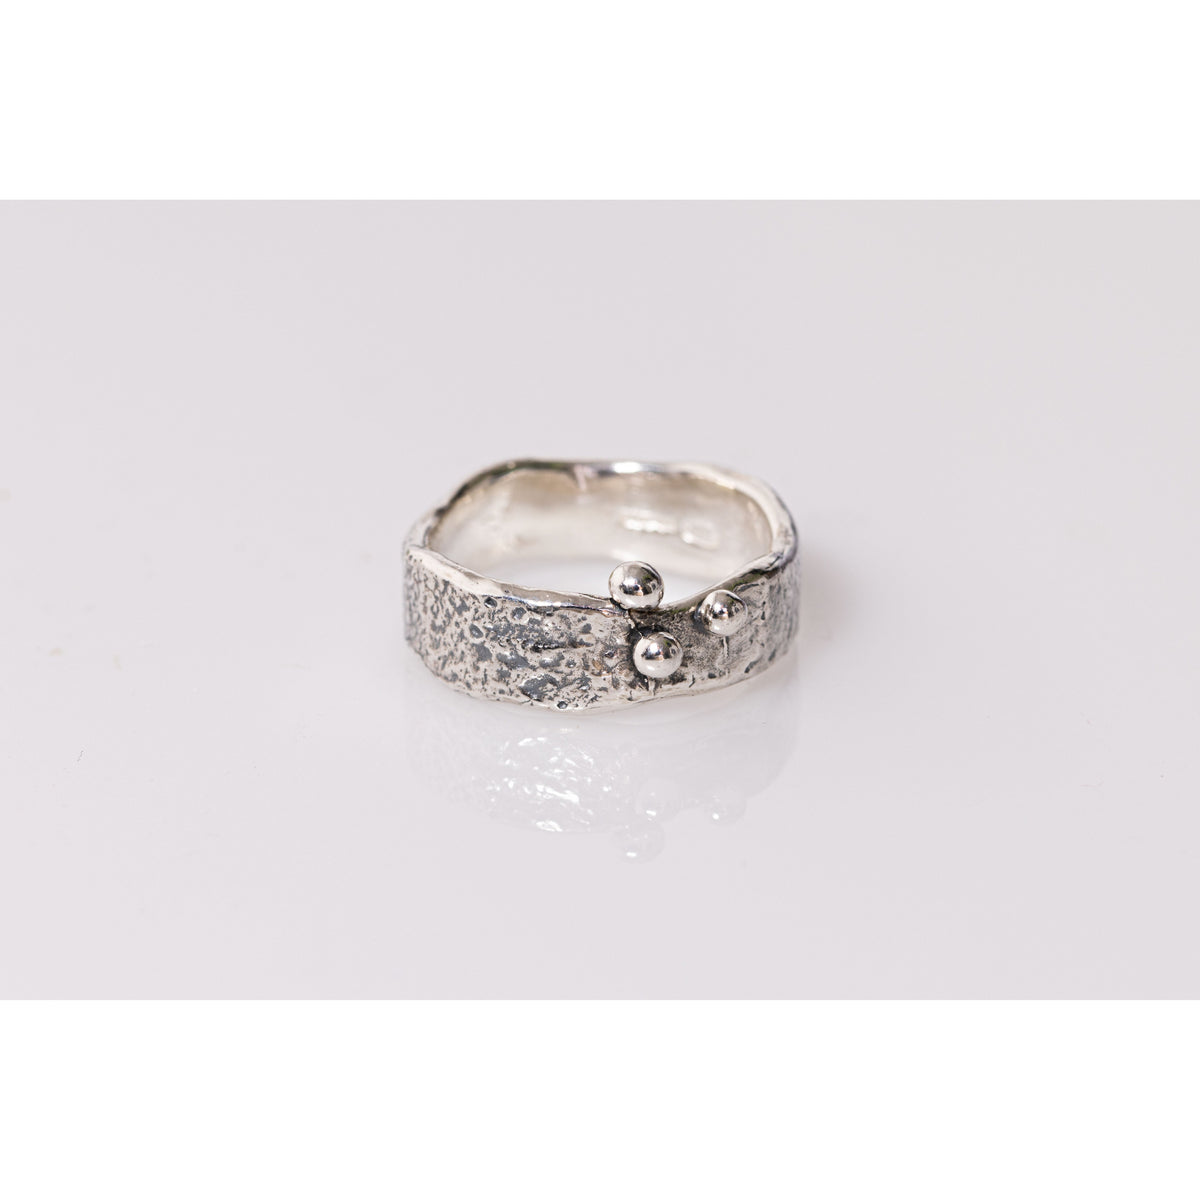 &#39;SA R13 Organic Silver Ring&#39; by Sandra Austin jewellery, available at Padstow Gallery, Cornwall